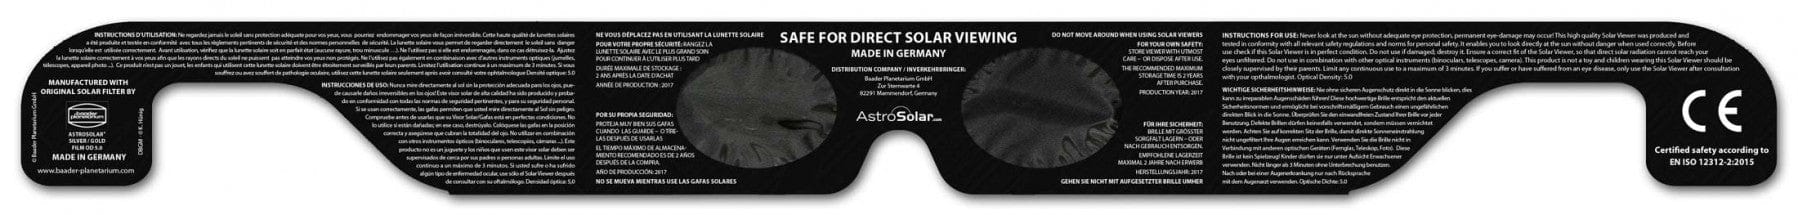 Baader Planetarium Accessory Baader Solar Viewer AstroSolar® Silver/Gold Eclipse Glasses (single piece packaging) - 2459294